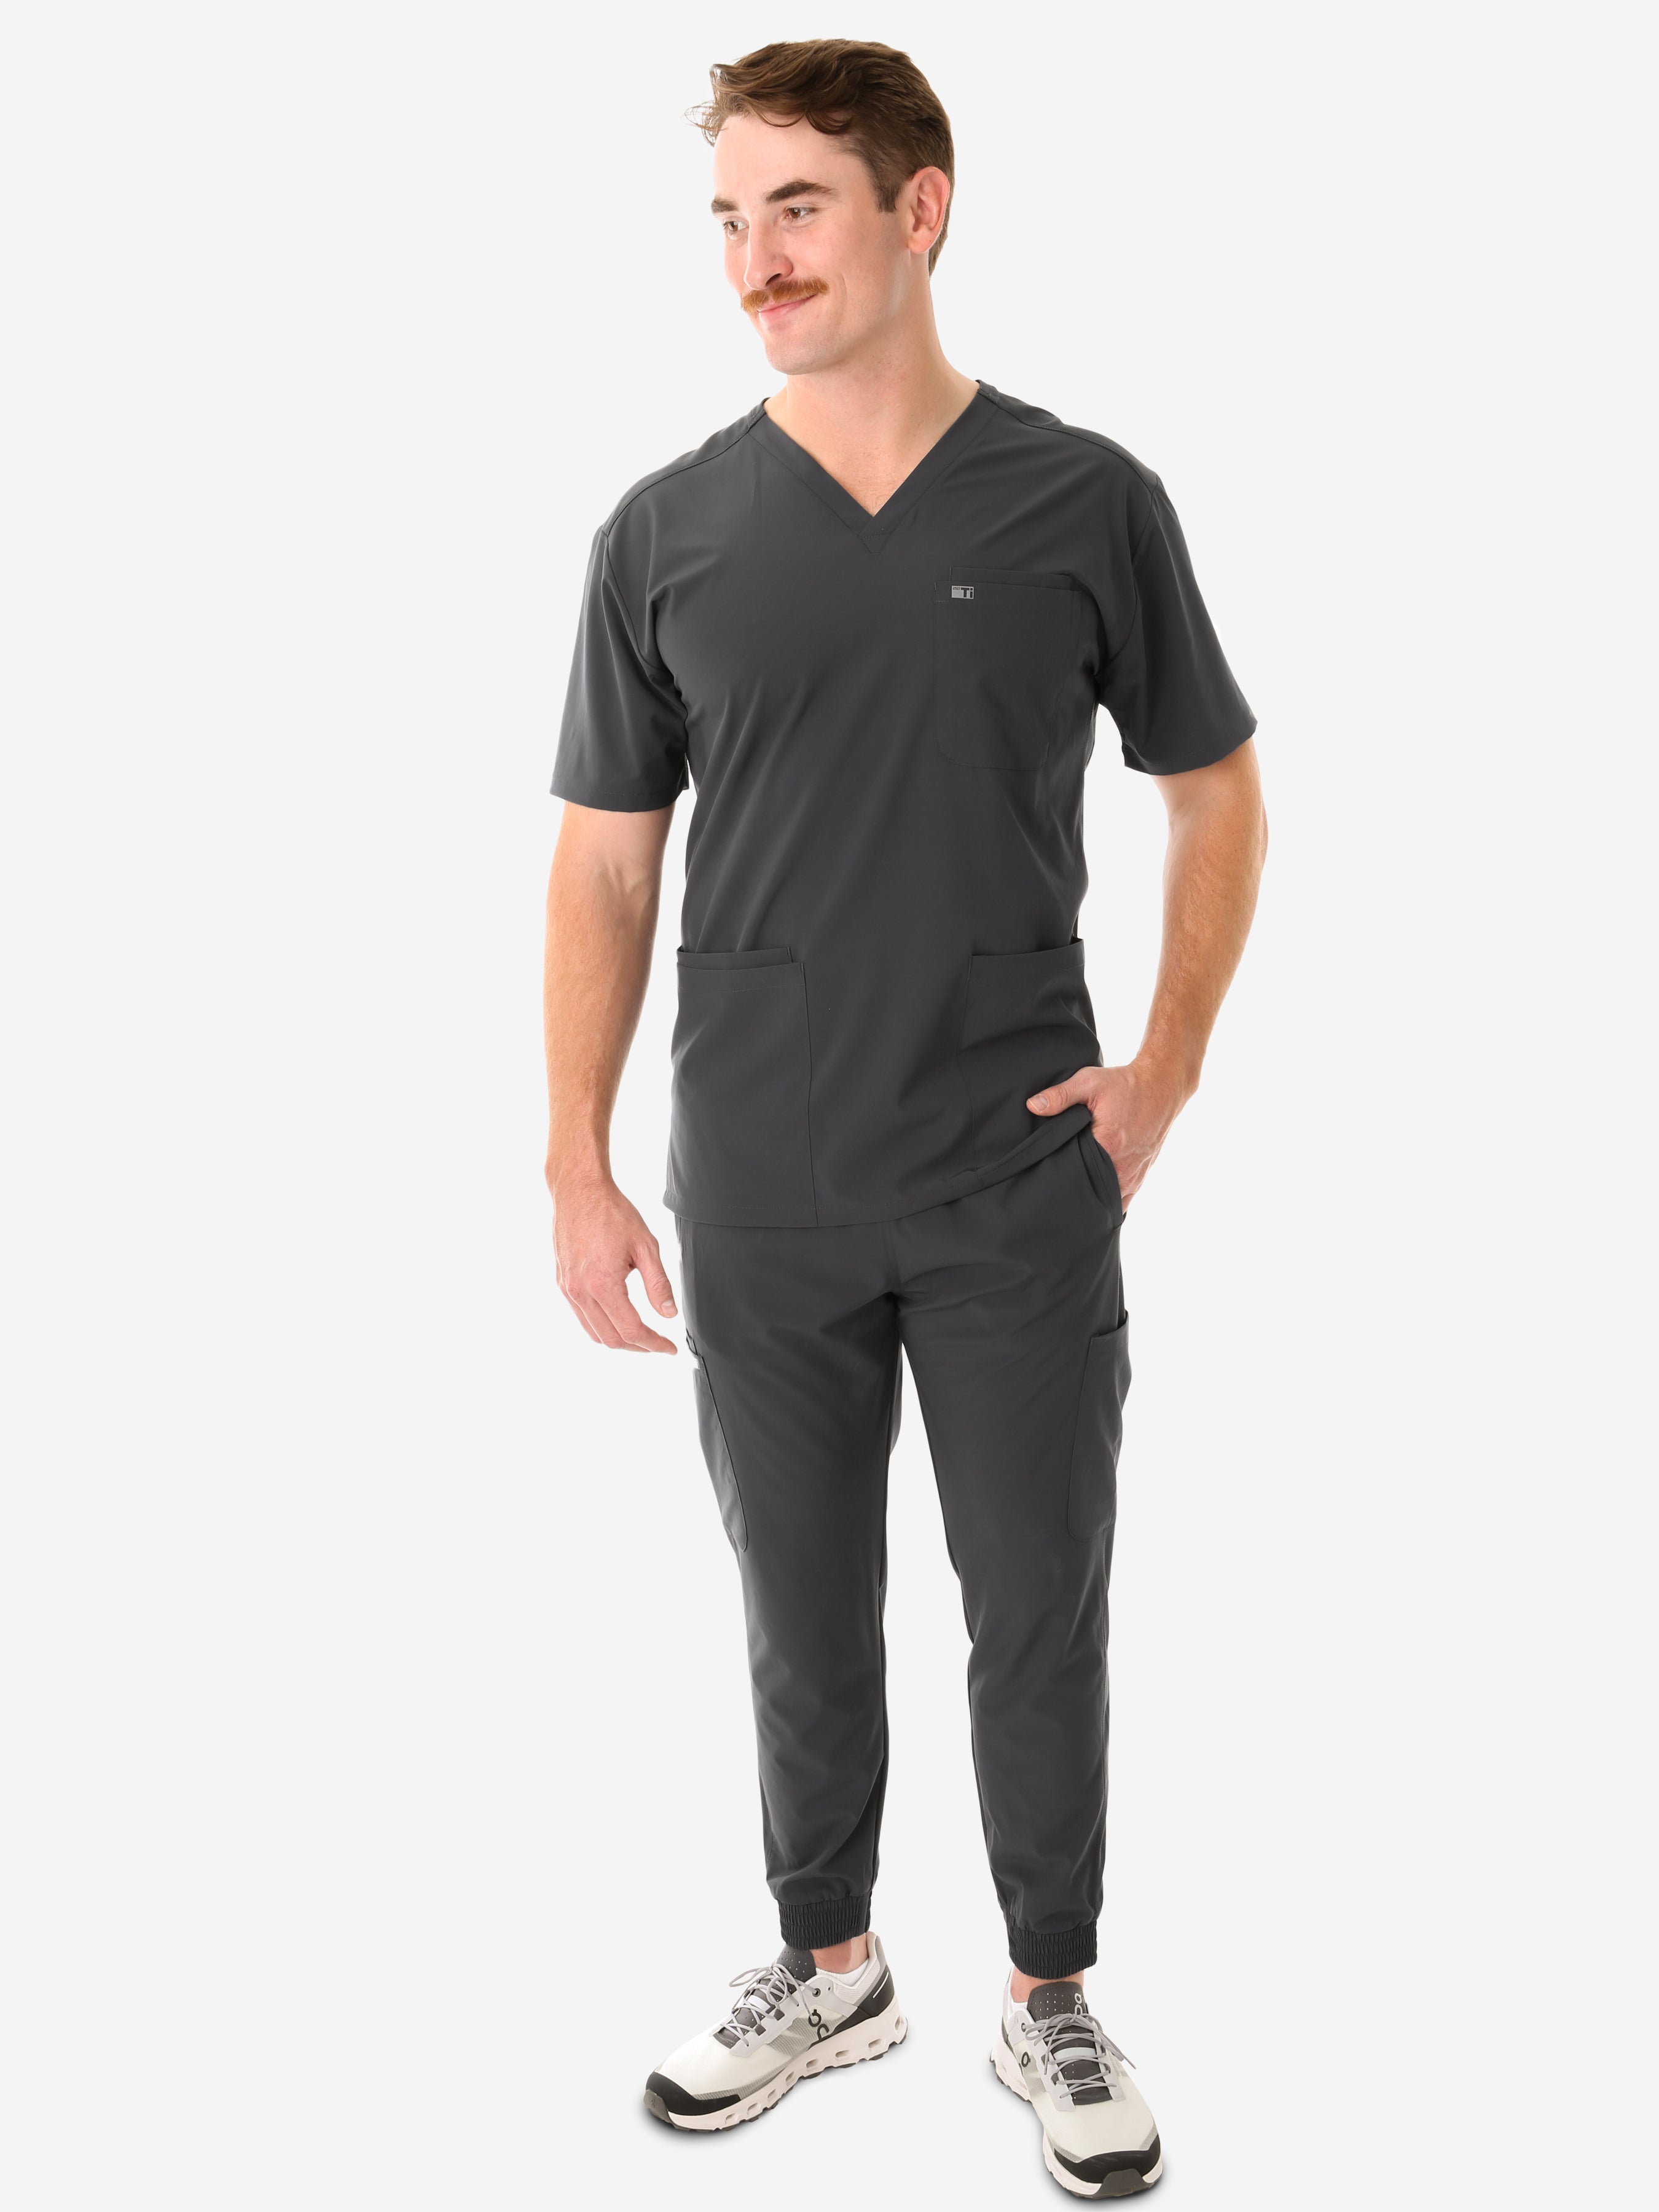 Men&#39;s Charocal Gray Five-Pocket Scrub Top Full Body Front View with Joggers